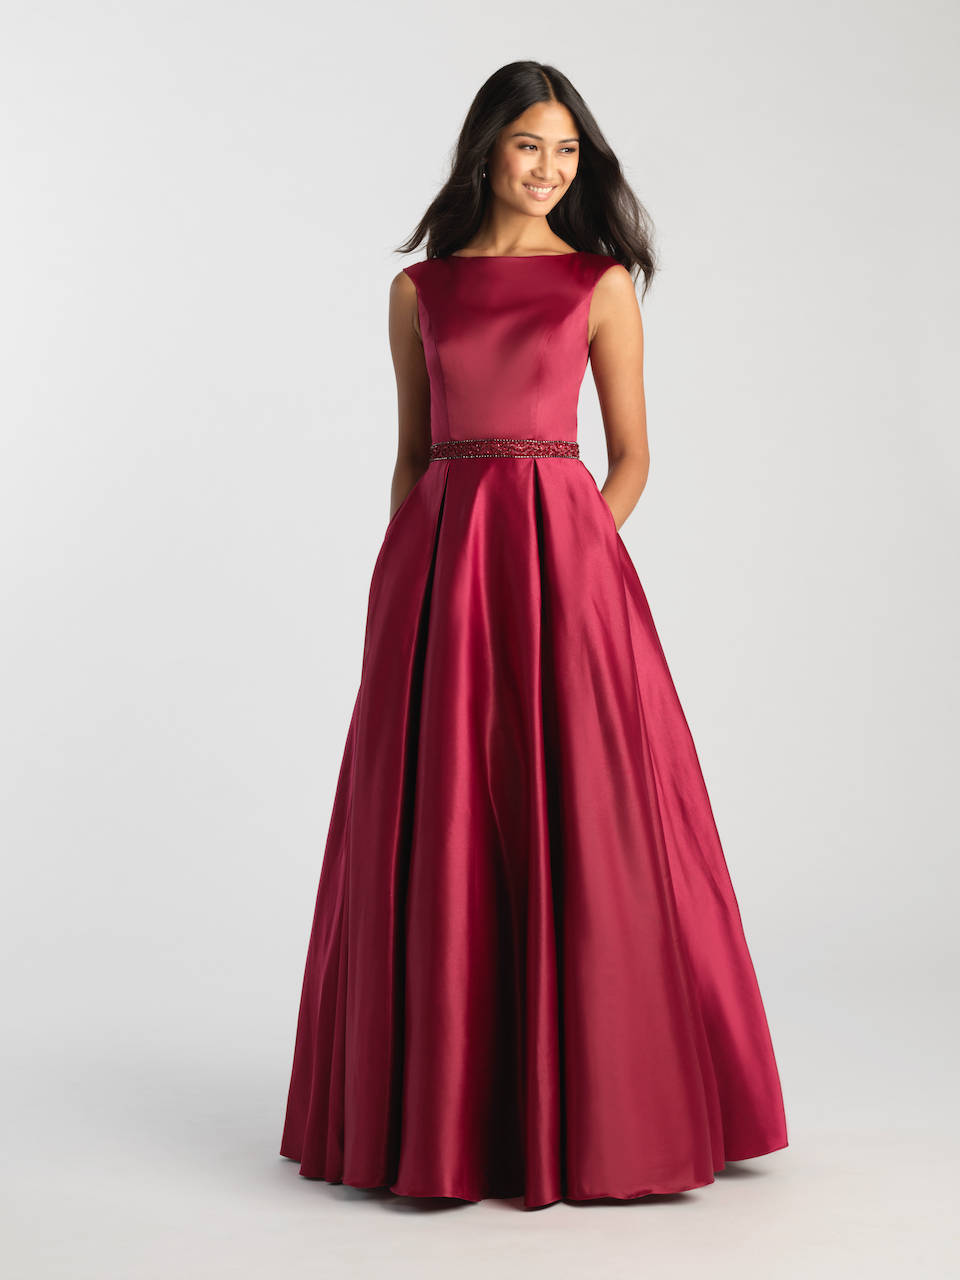 MJ 20-506M burgundy Modest Prom Dress Ball Gown for plus size LDS formal 